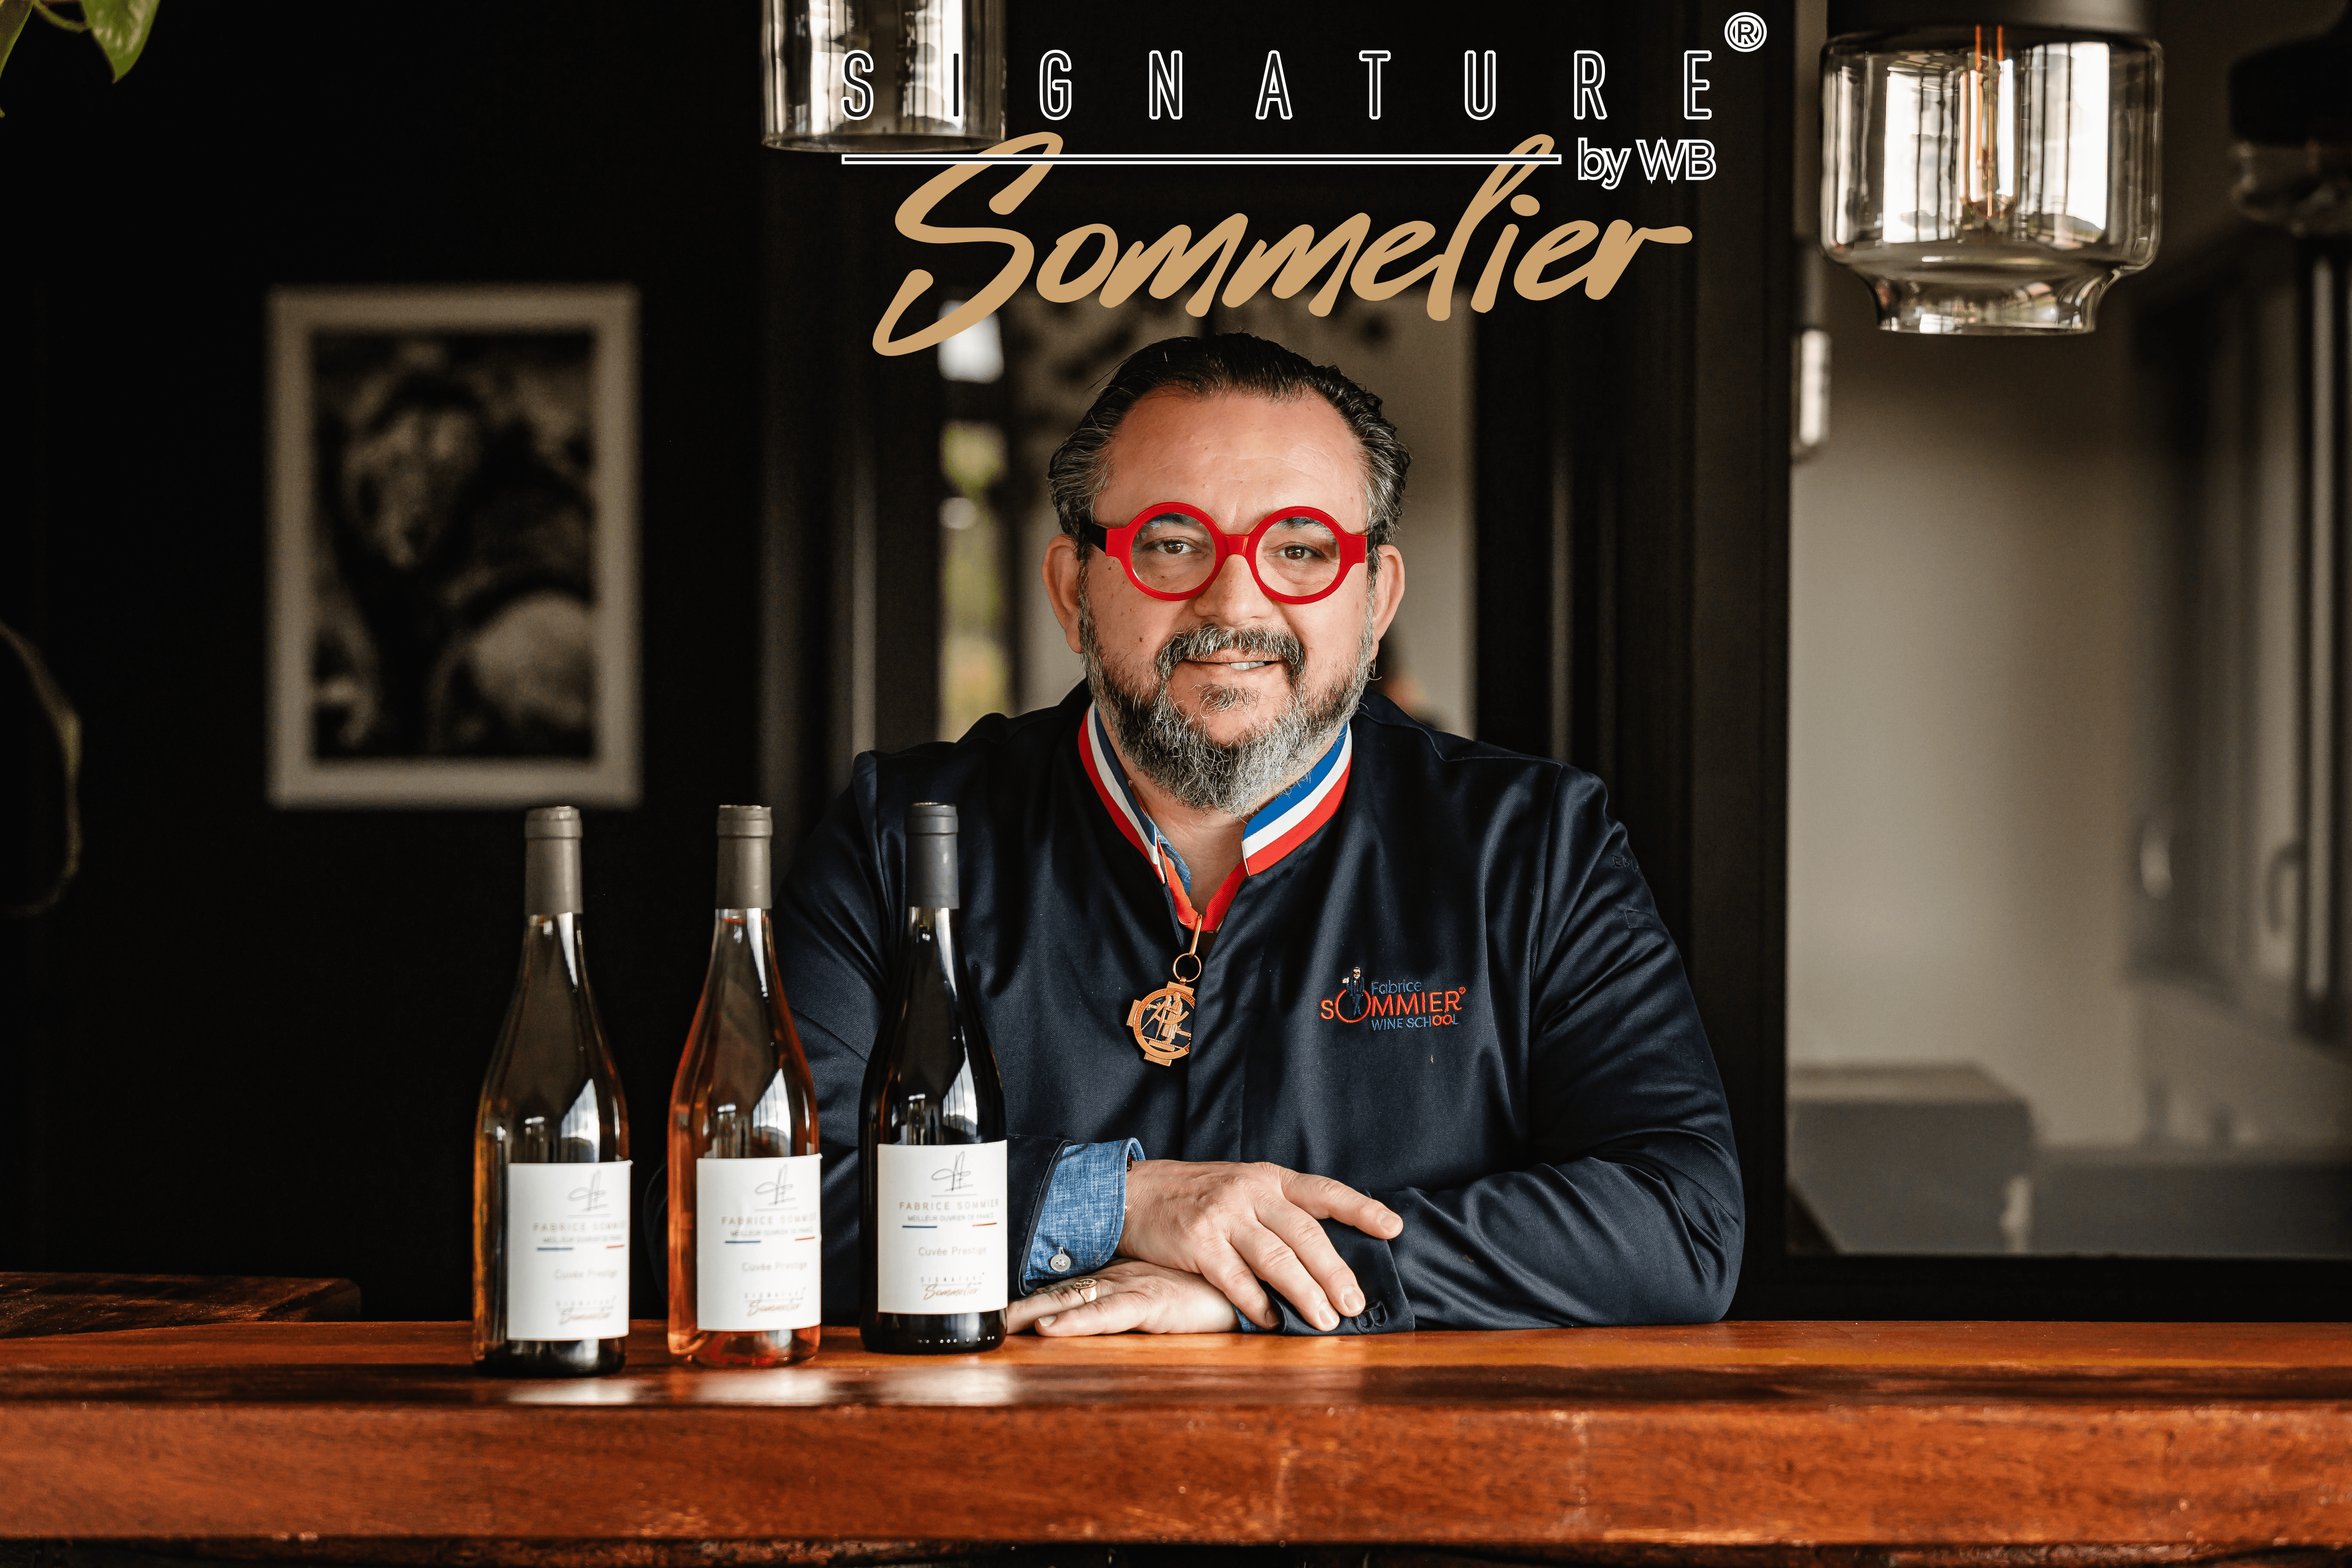 Fabrice Sommier elected president of the main French Sommelier association